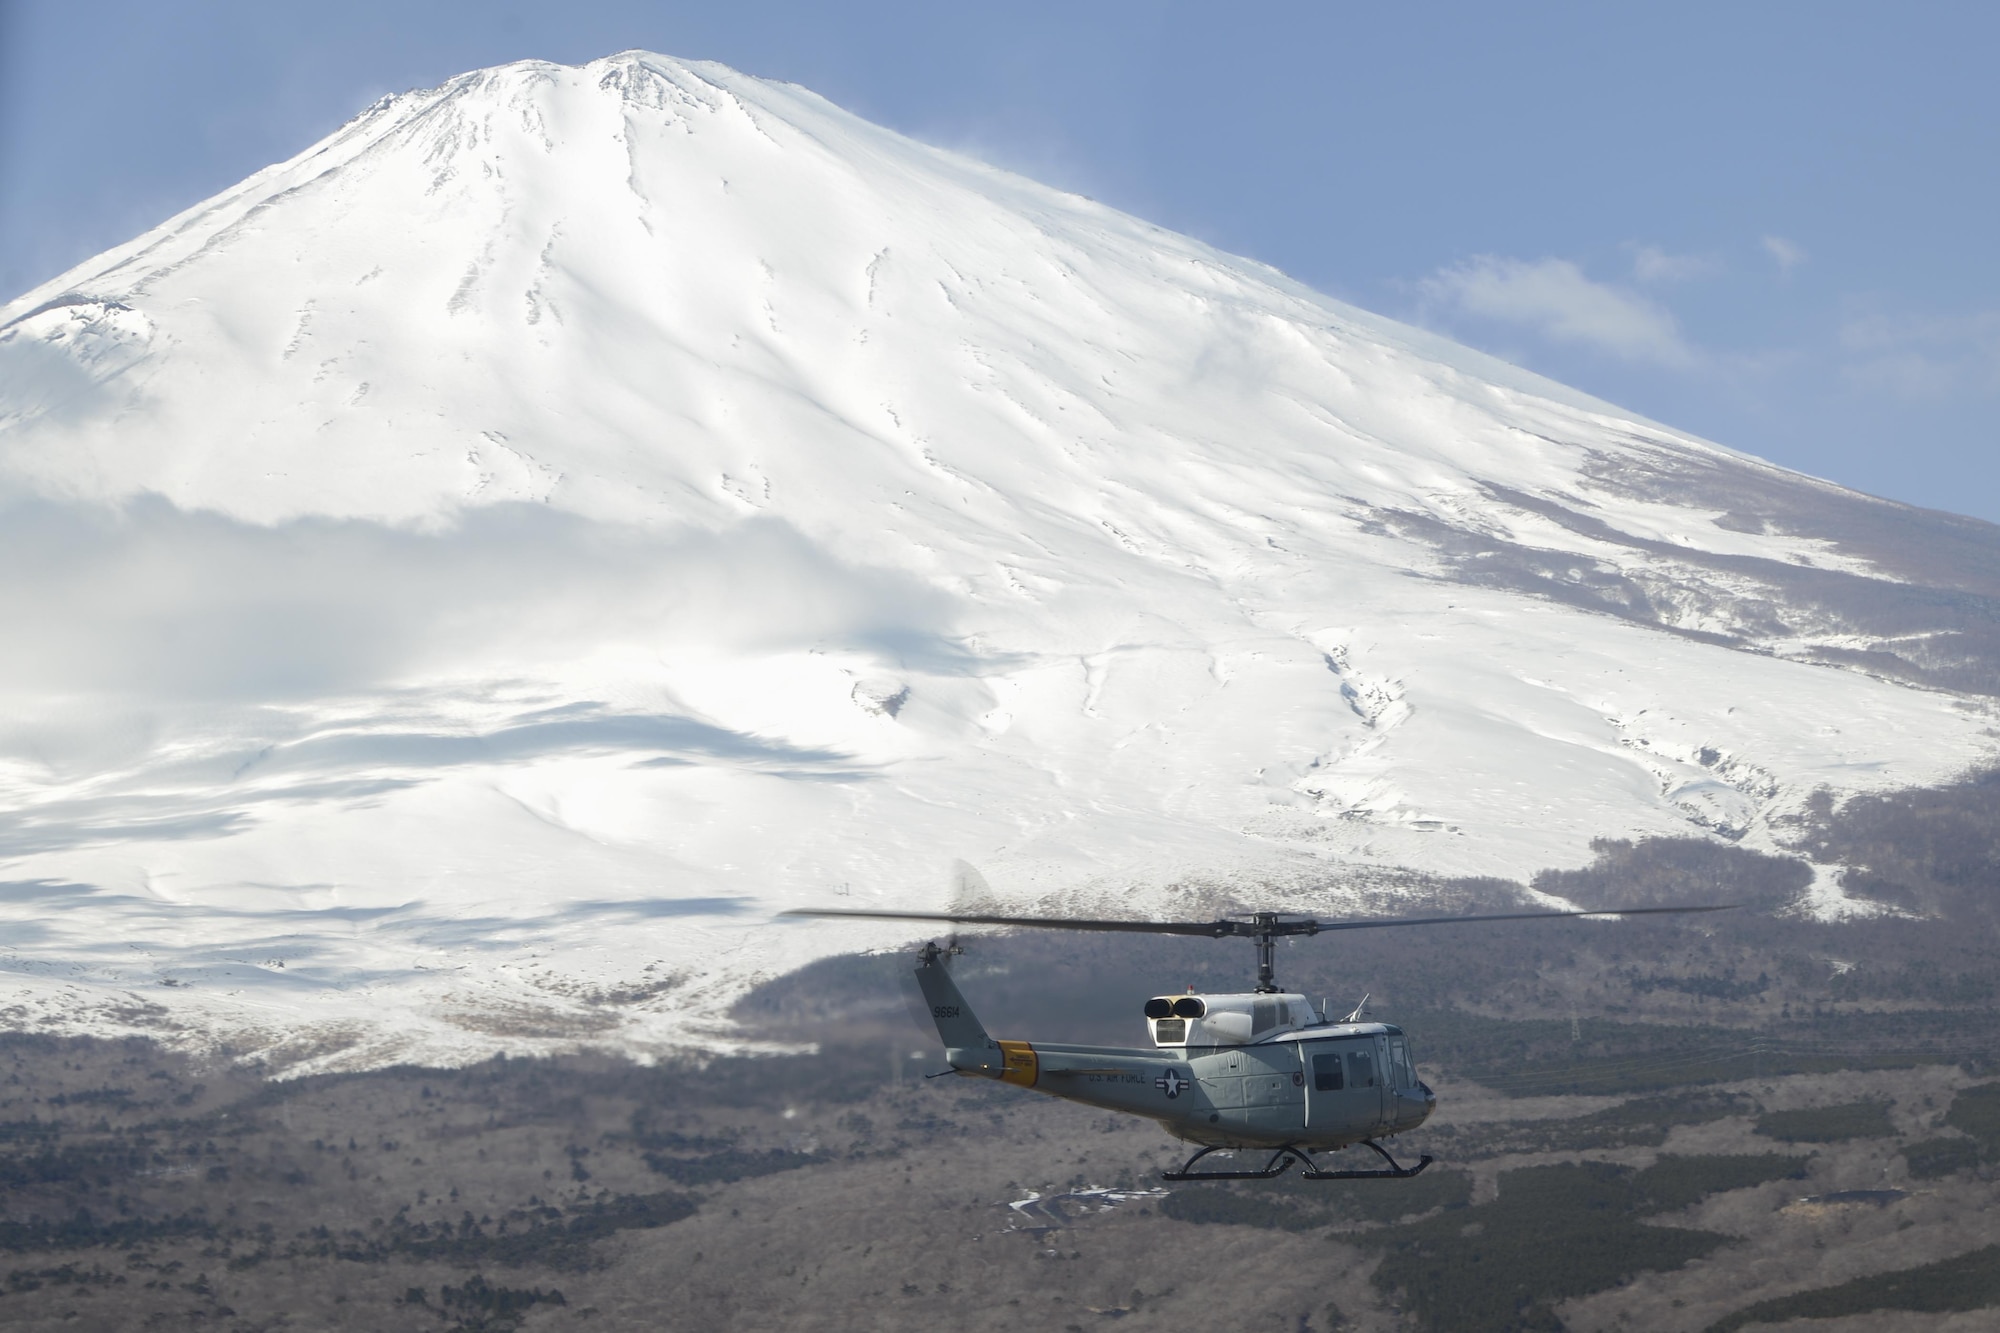 An UH-1N Iroquois flies toward Mt. Fuji during a bilateral training mission Jan. 29, 2015, near Tokyo. Two helicopters were used during the training mission, in which the pilots were able to practice formations, maneuvers and rescue tactics with Japan Ground Self-Defense Force members. (U.S. Air Force photo/Senior Airman Michael Washburn)